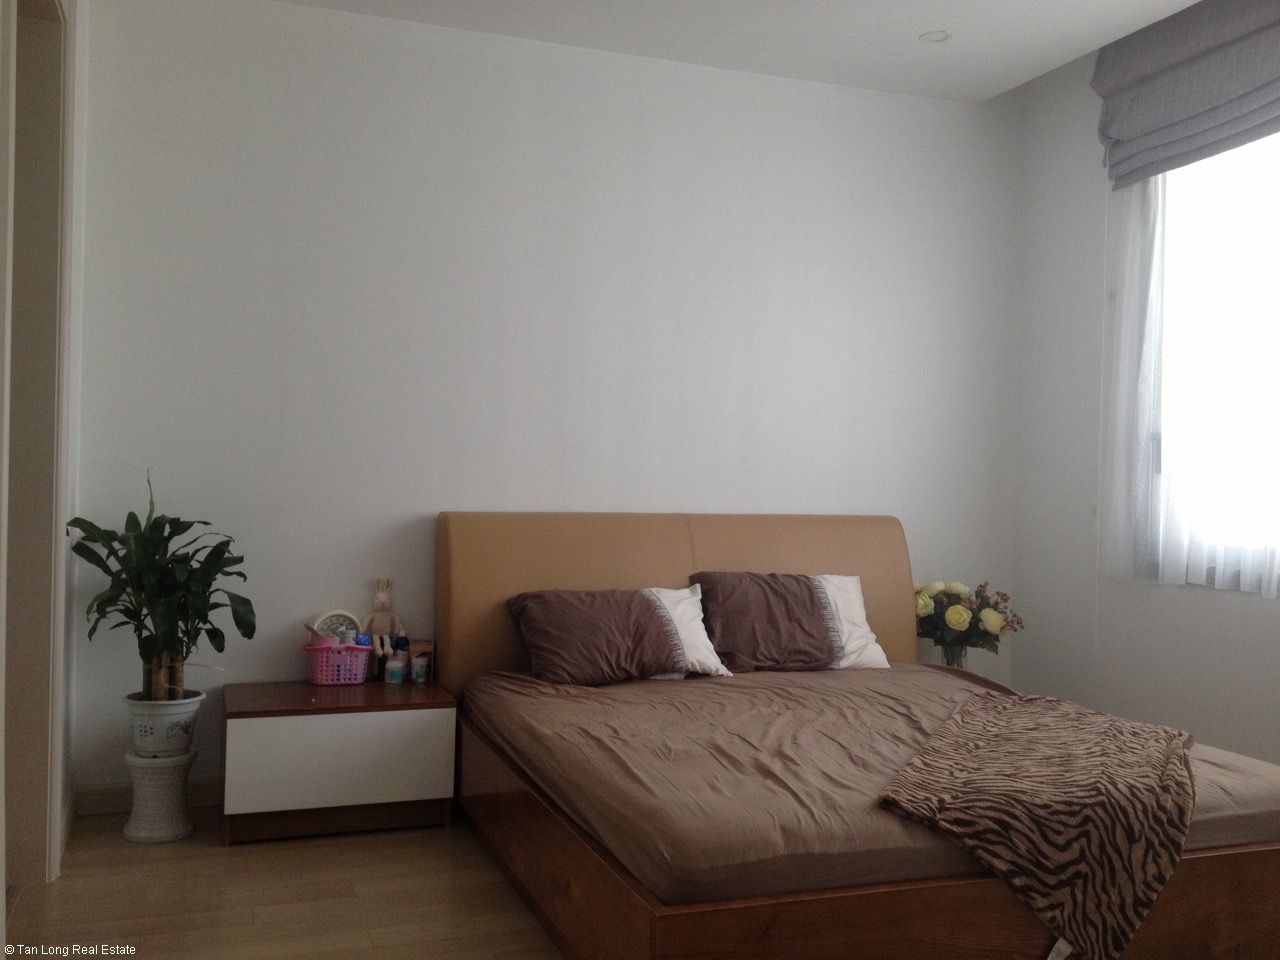 Charming 3 bedroom apartment for rent in Hyundai Hillstate, Ha Dong dist, Hanoi 6